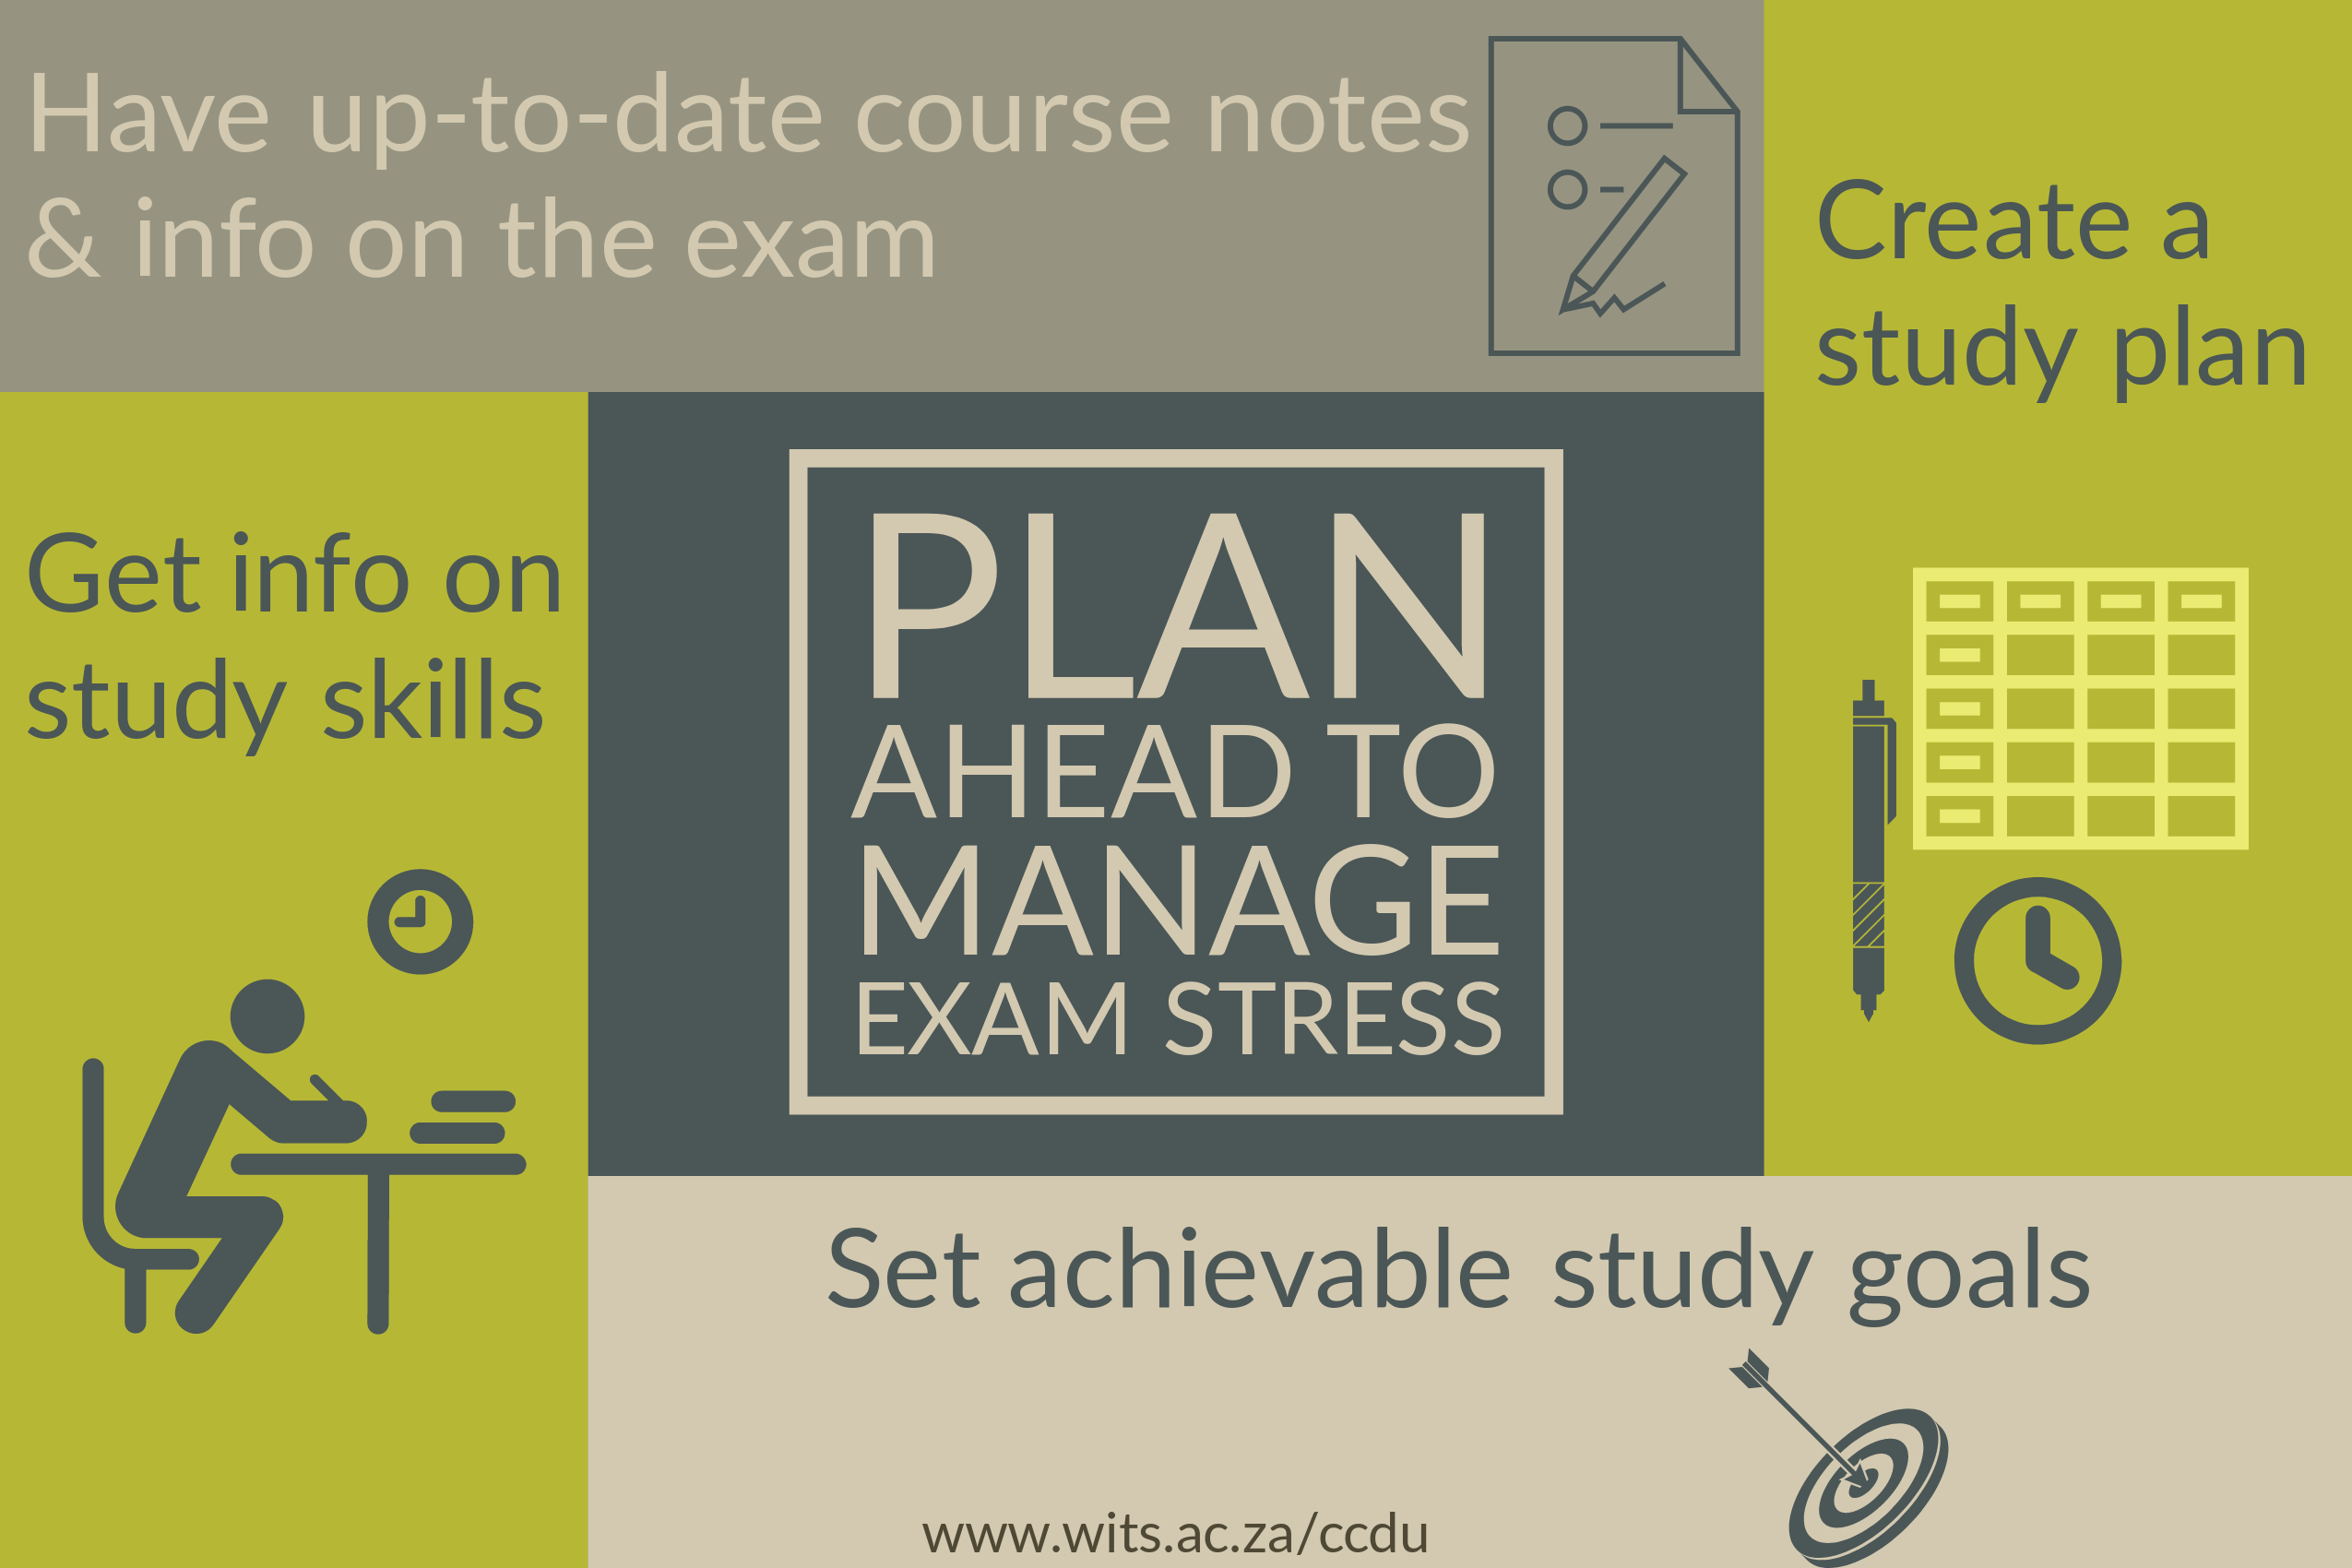 Infographic showing ways to manage exam stress